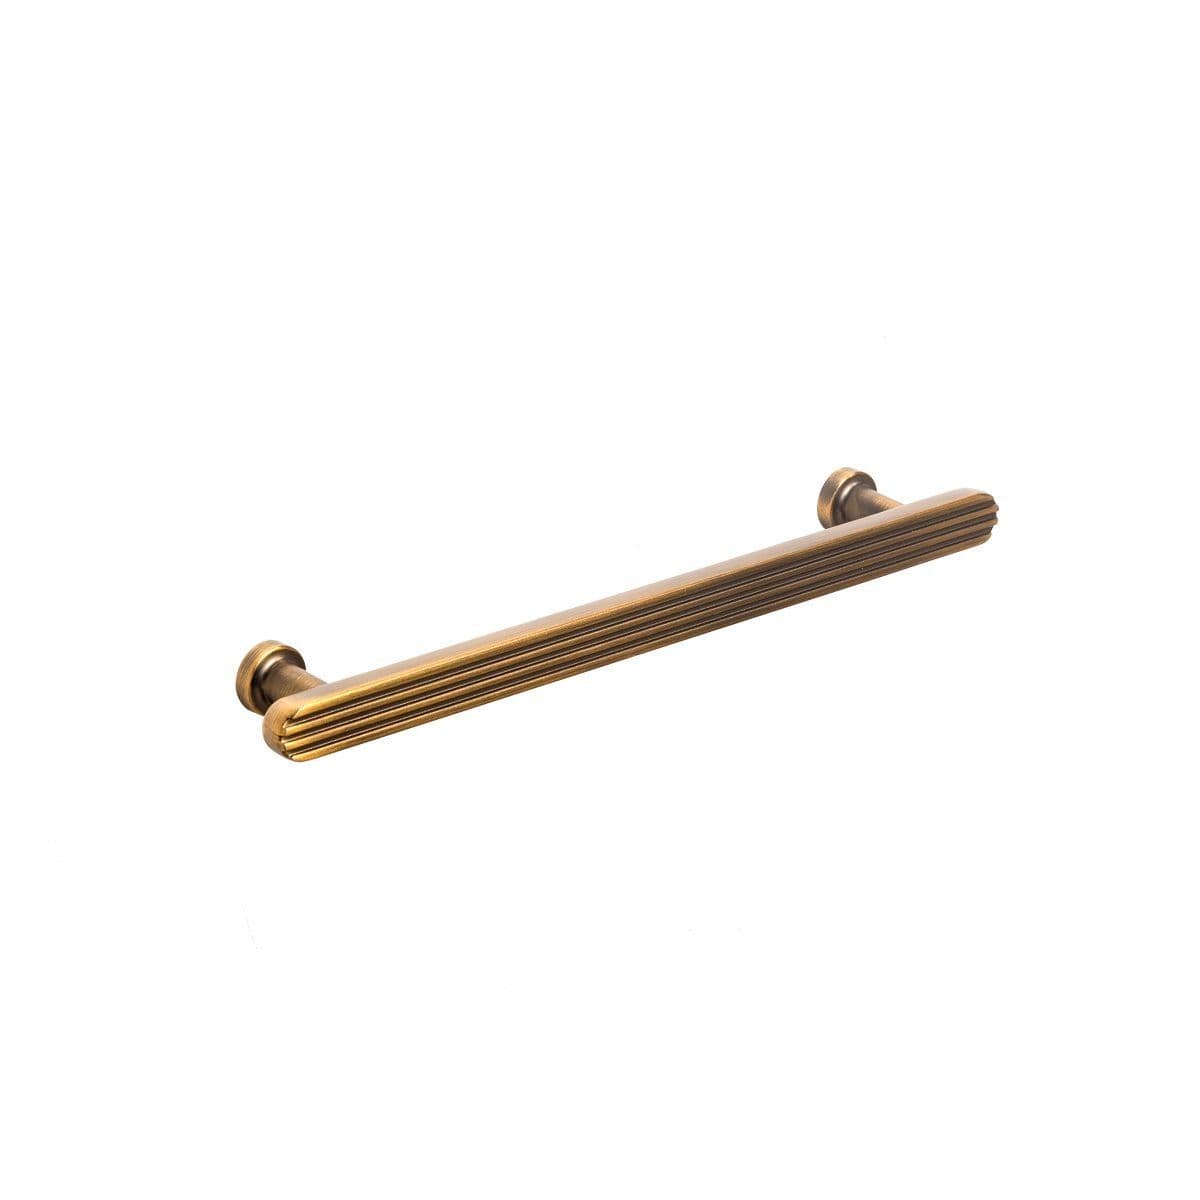 HENLEY FLUTED T BAR Cupboard Handle - 160mm h/c size - 4 finishes (PWS H1181.160)